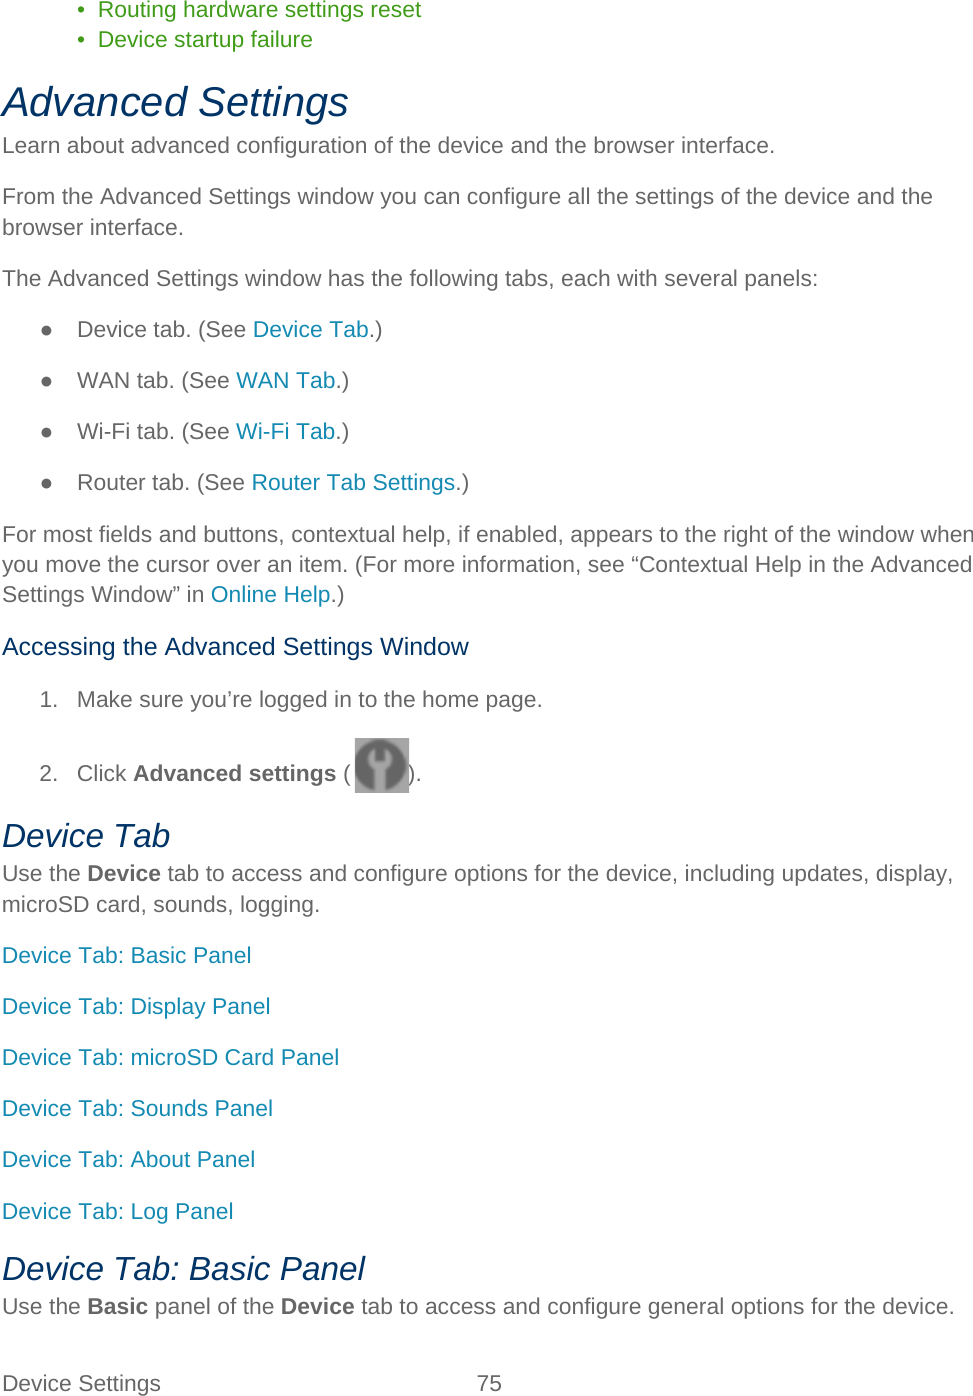 Device Settings 75   •  Routing hardware settings reset •  Device startup failure Advanced Settings Learn about advanced configuration of the device and the browser interface. From the Advanced Settings window you can configure all the settings of the device and the browser interface. The Advanced Settings window has the following tabs, each with several panels: ● Device tab. (See Device Tab.) ● WAN tab. (See WAN Tab.) ● Wi-Fi tab. (See Wi-Fi Tab.) ● Router tab. (See Router Tab Settings.) For most fields and buttons, contextual help, if enabled, appears to the right of the window when you move the cursor over an item. (For more information, see “Contextual Help in the Advanced Settings Window” in Online Help.) Accessing the Advanced Settings Window 1. Make sure you’re logged in to the home page. 2. Click Advanced settings ( ). Device Tab Use the Device tab to access and configure options for the device, including updates, display, microSD card, sounds, logging. Device Tab: Basic Panel Device Tab: Display Panel Device Tab: microSD Card Panel Device Tab: Sounds Panel Device Tab: About Panel Device Tab: Log Panel Device Tab: Basic Panel Use the Basic panel of the Device tab to access and configure general options for the device. 